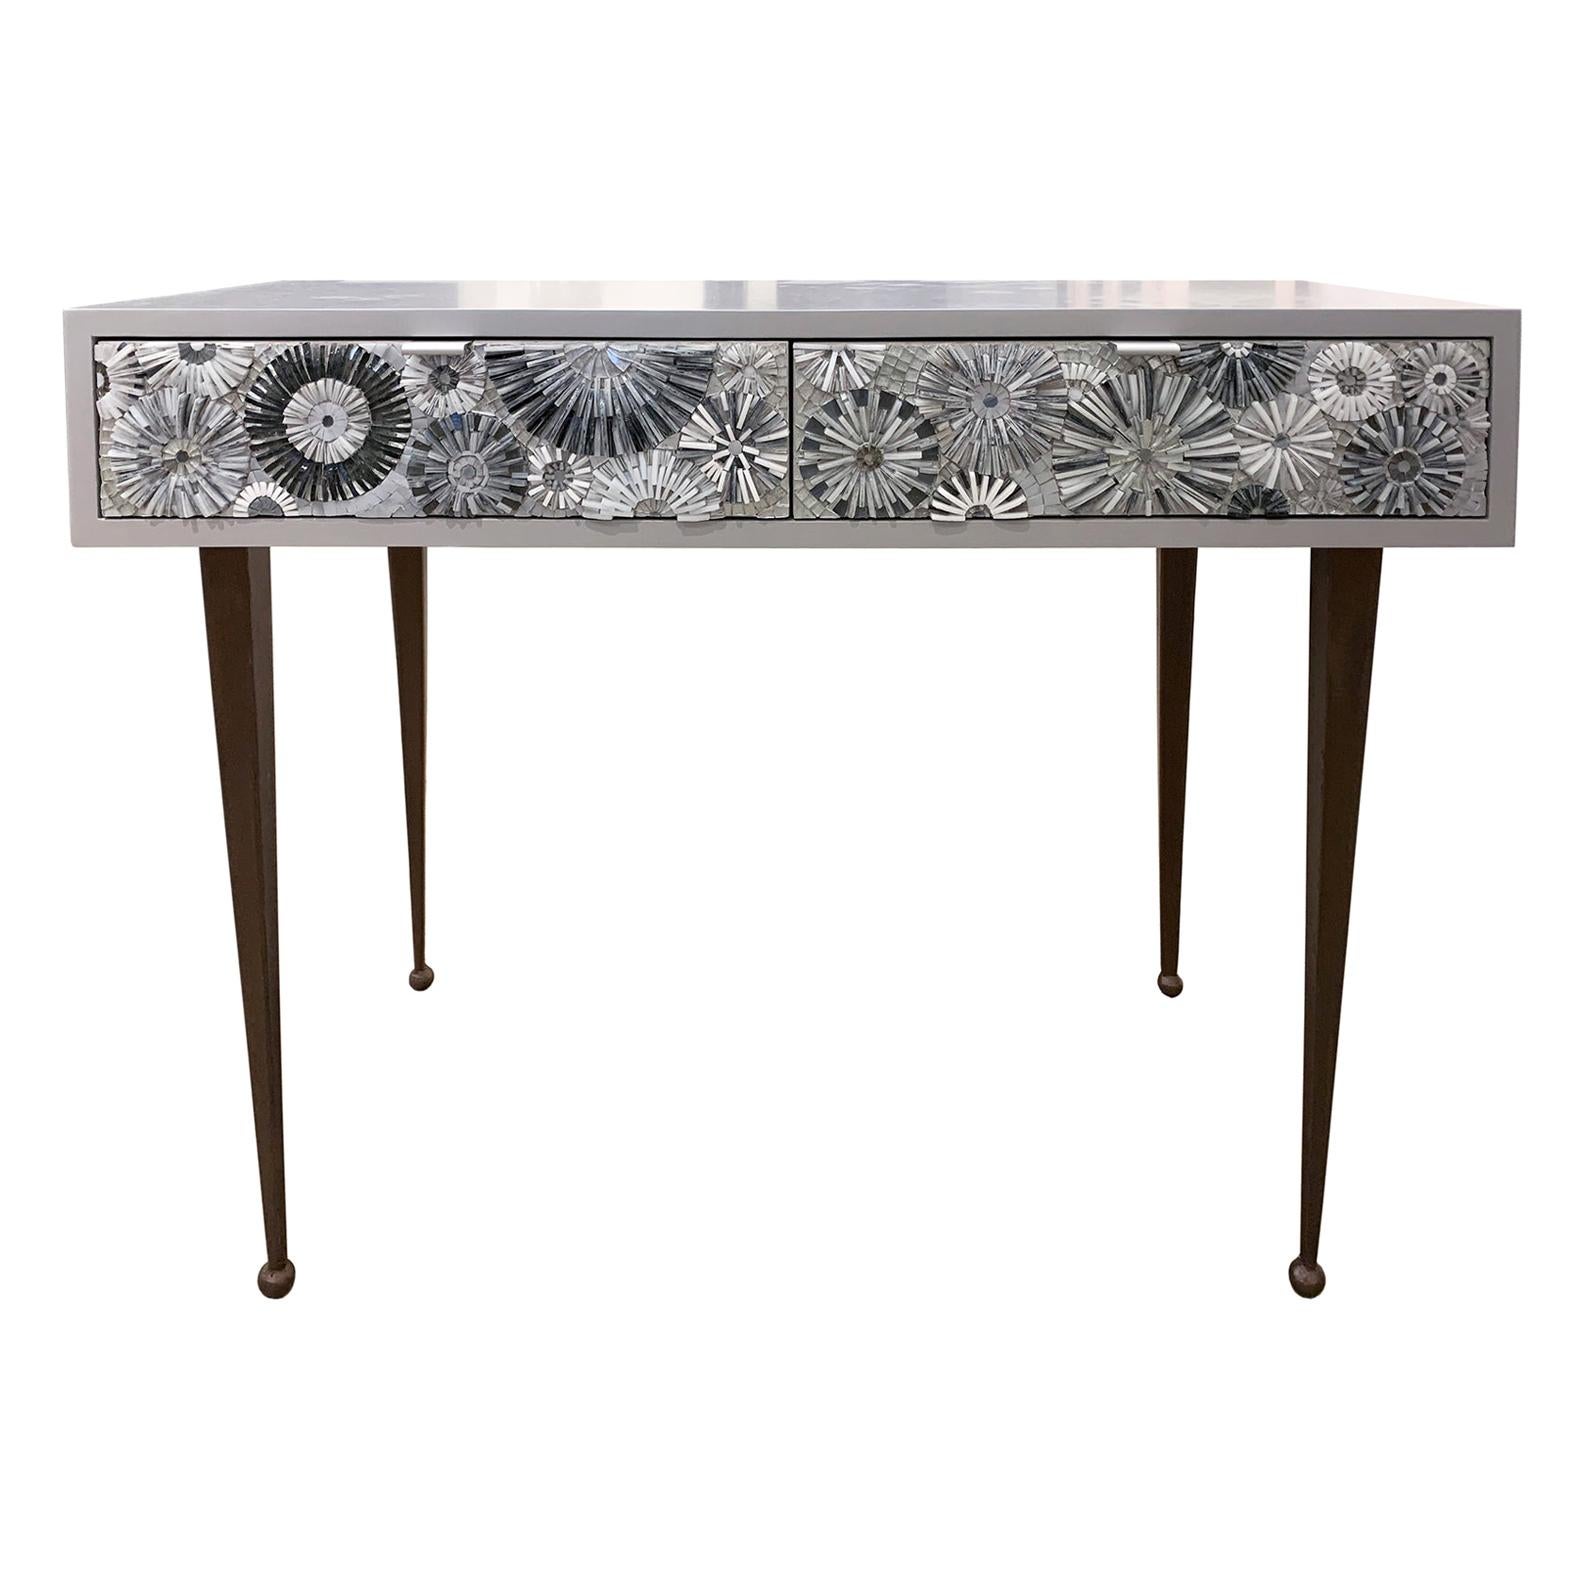 Modern Gray Blossom Glass Mosaic Desk with Bronze Metal Base by Ercole Home